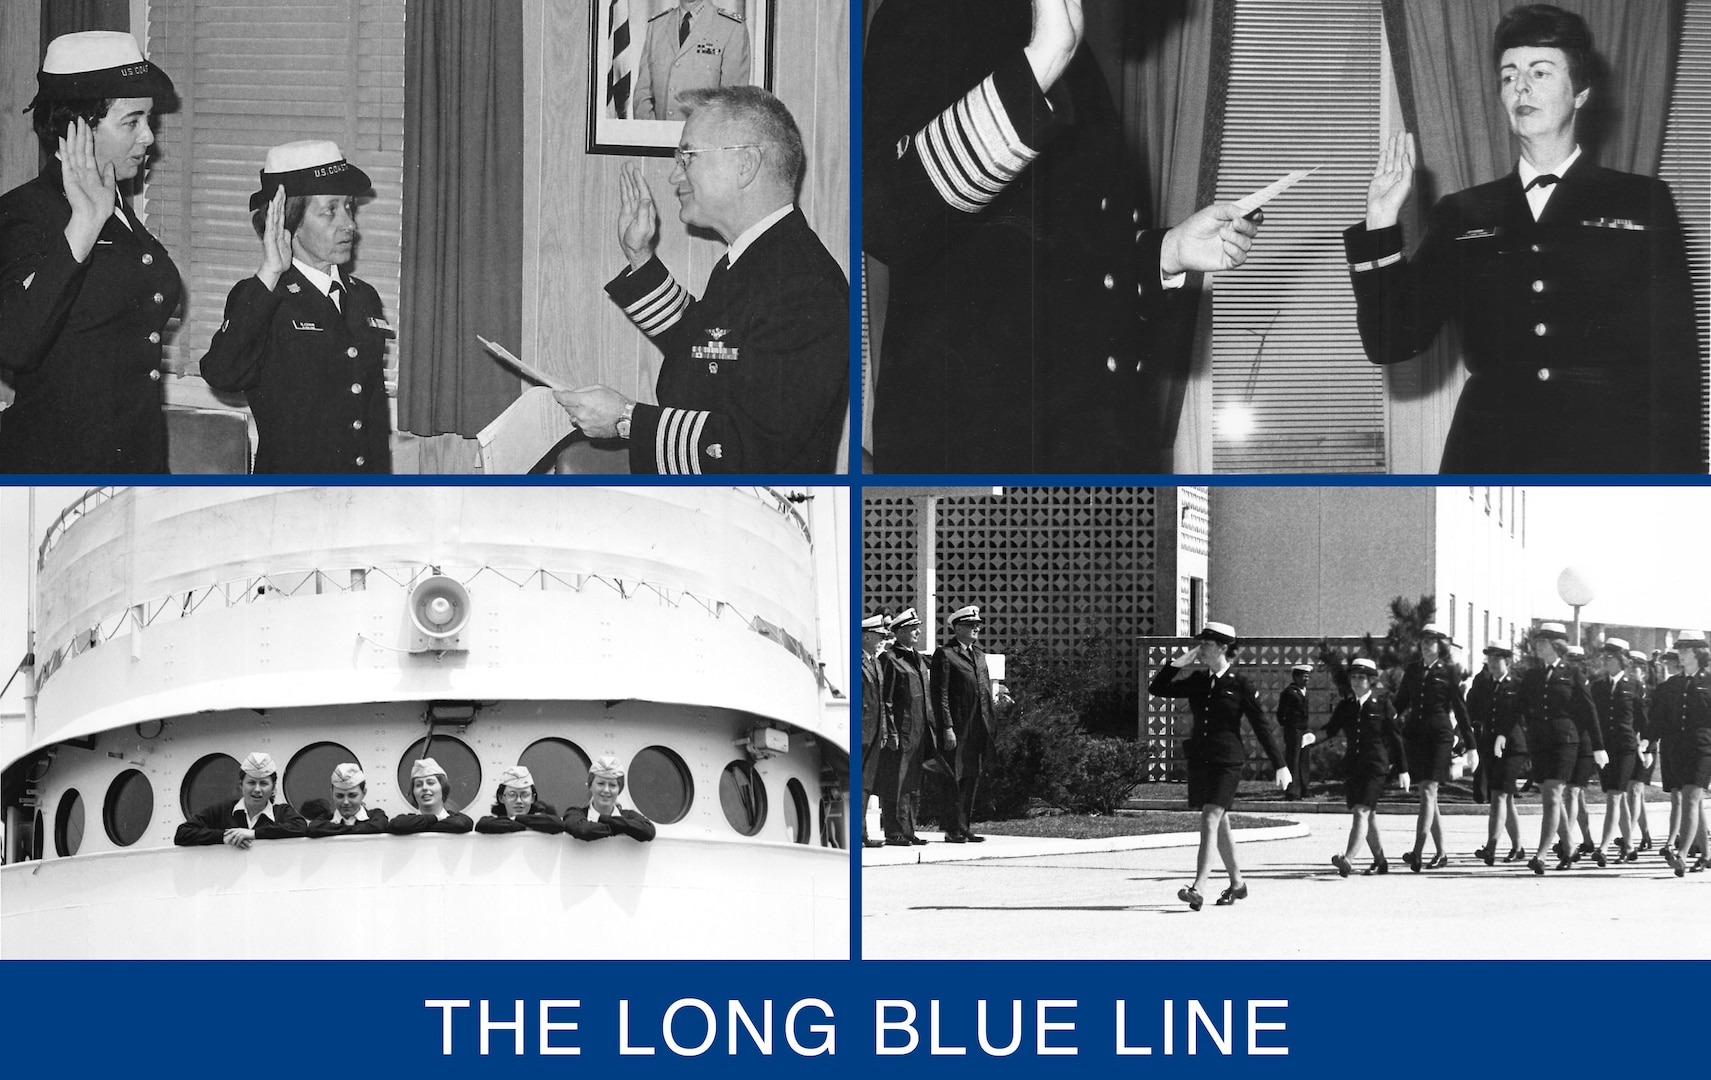 Four photos, all in a square showing various aspects of women in the service and their contributions. At the bottom of the four photos is the text "The Long Blue Line"